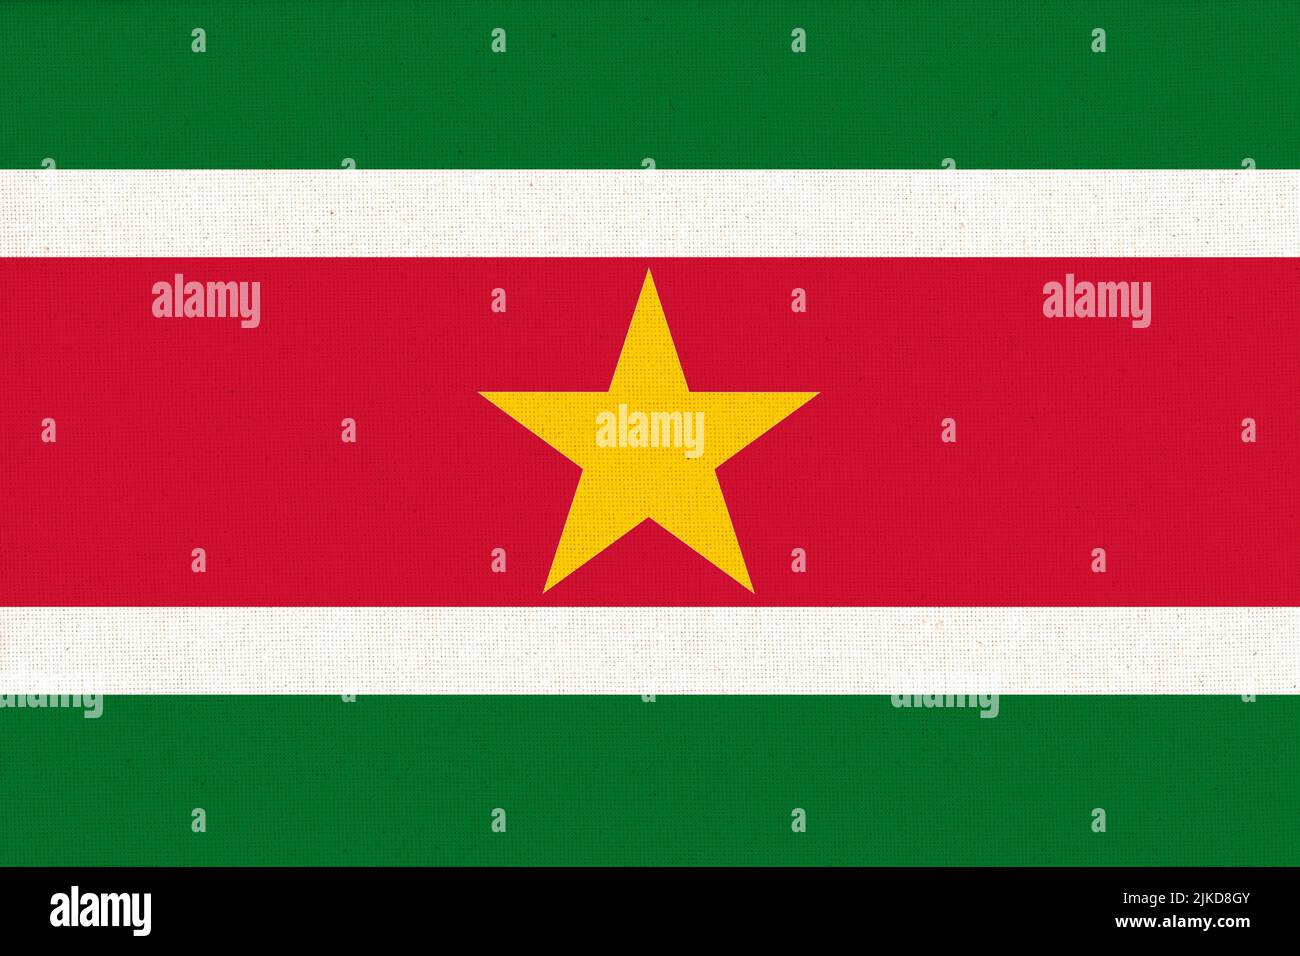 Flag of Suriname. Surinamese flag on fabric surface. Fabric Texture. National symbol. Republic of Suriname. Surinamese national flag. Stock Photo